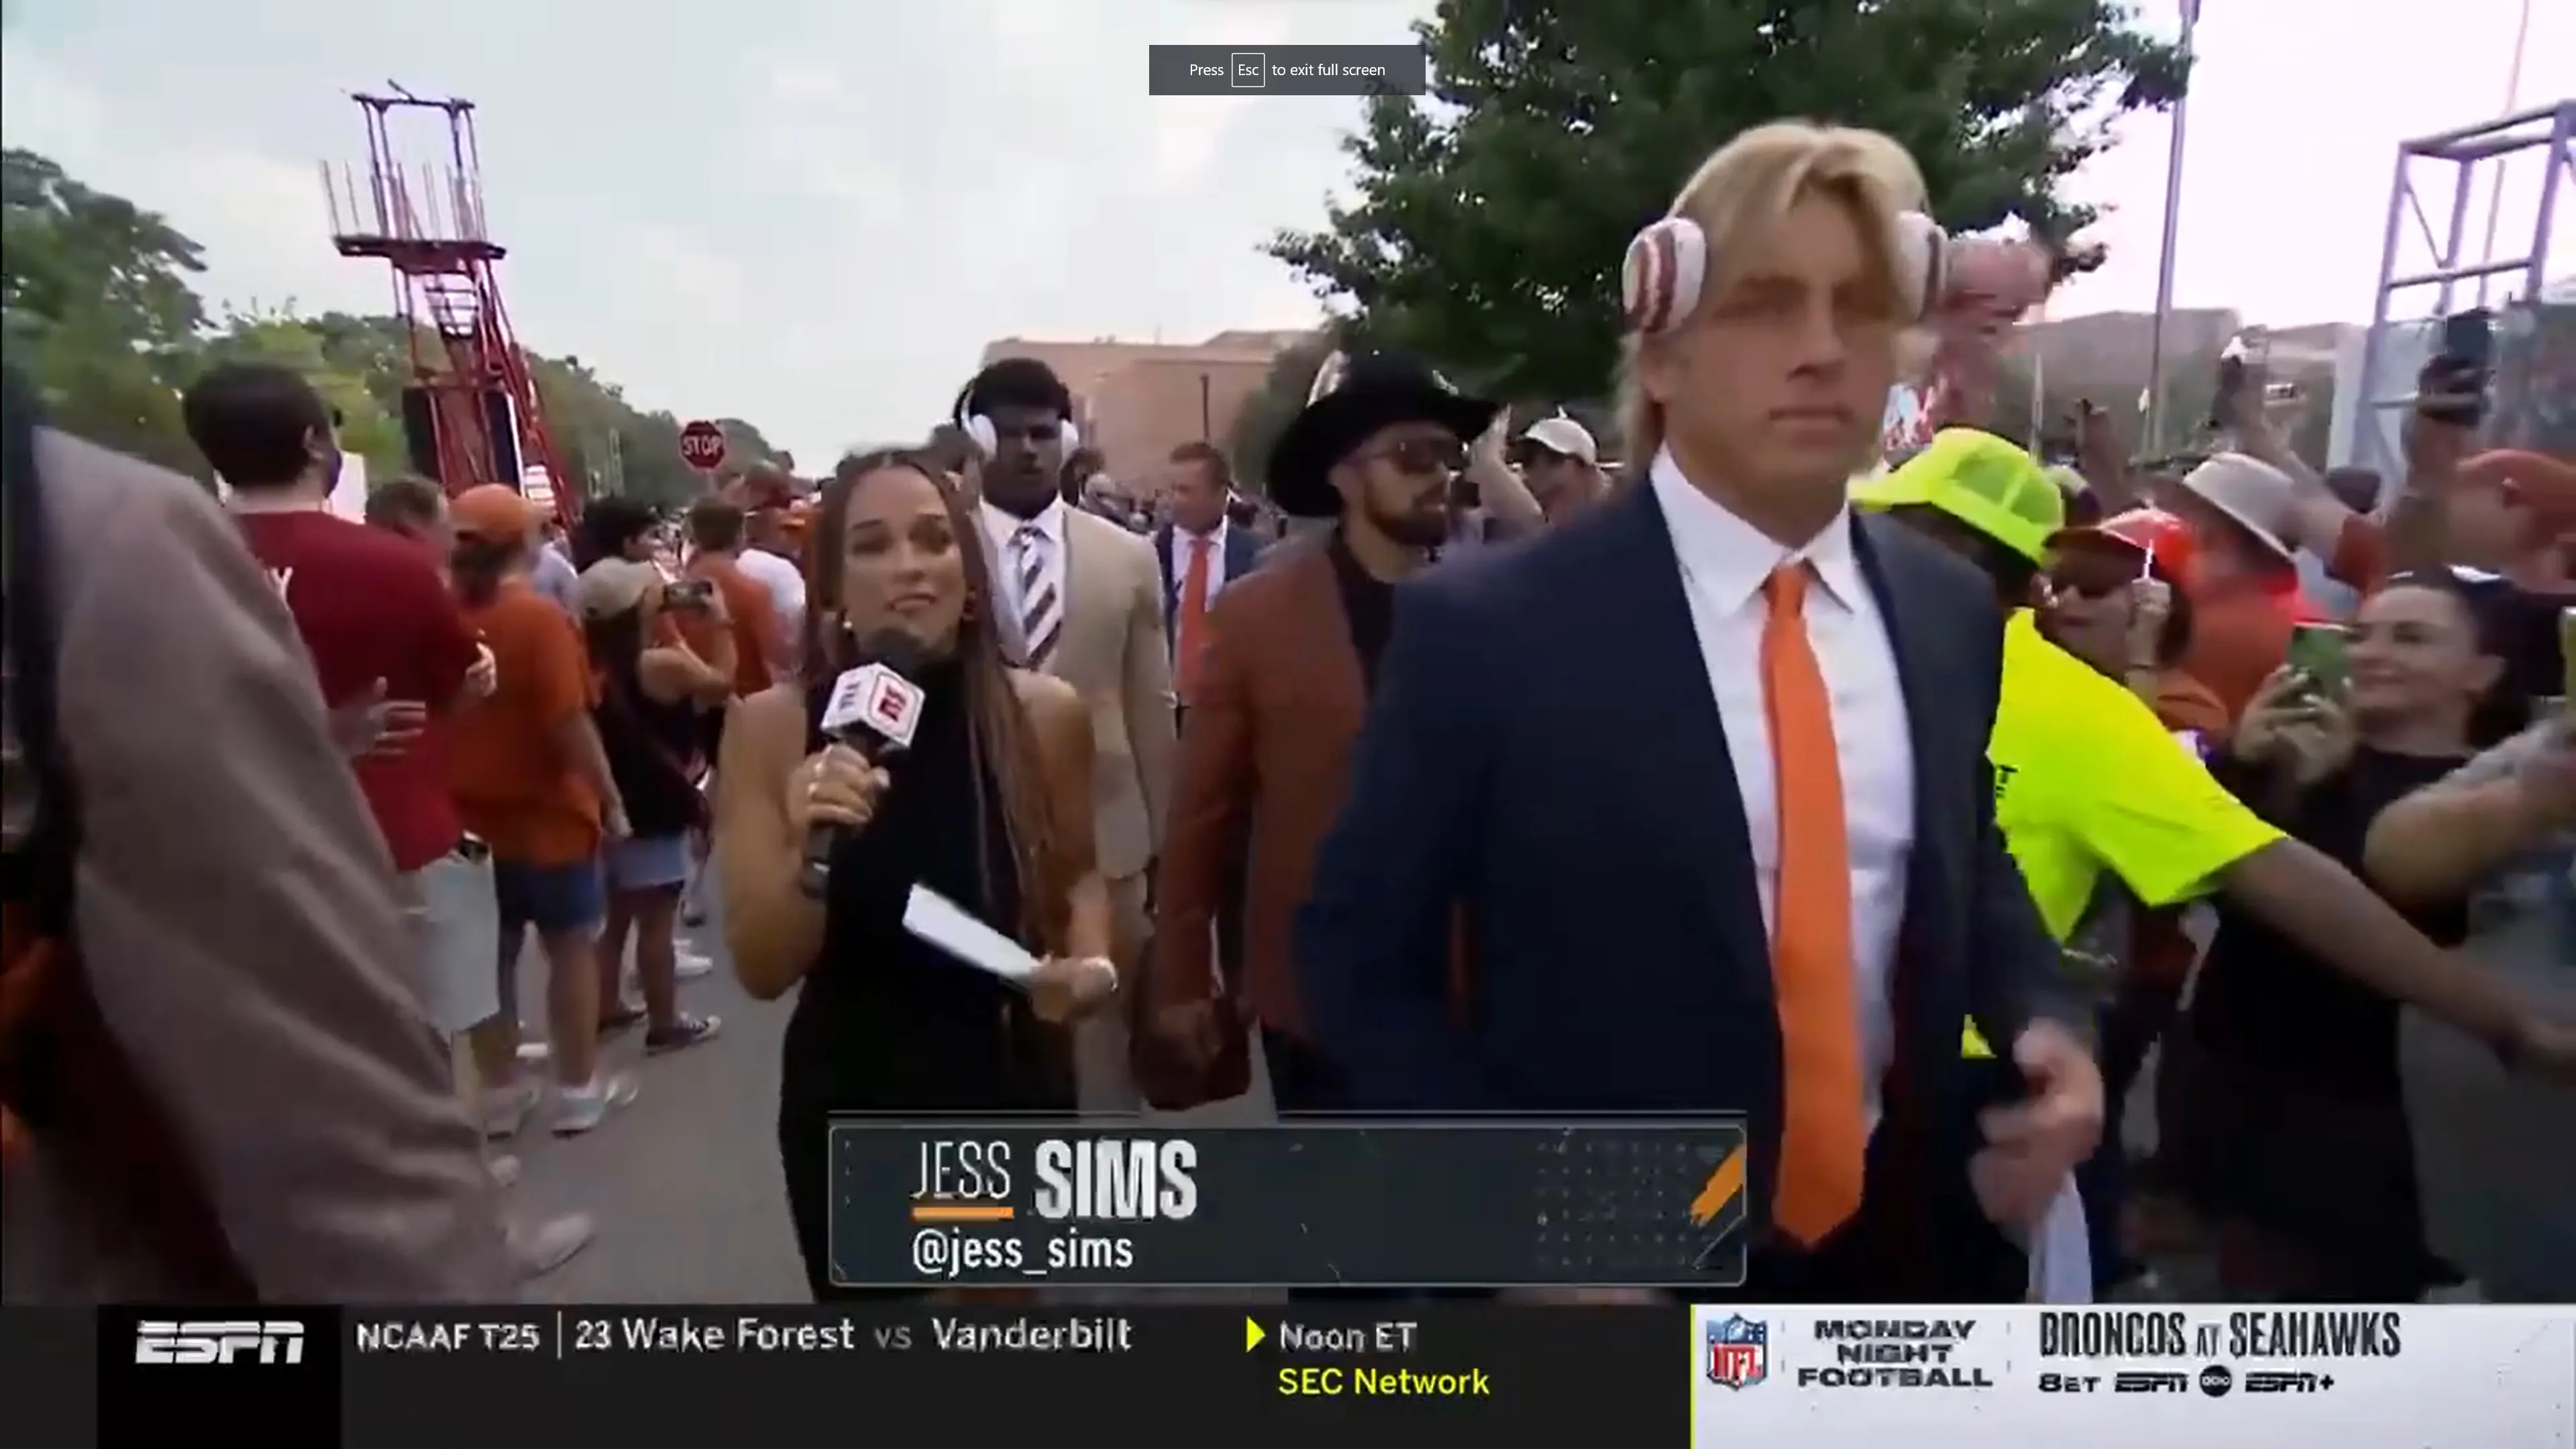 Reporter interviewing athletes while they walk towards the stadium before the game.